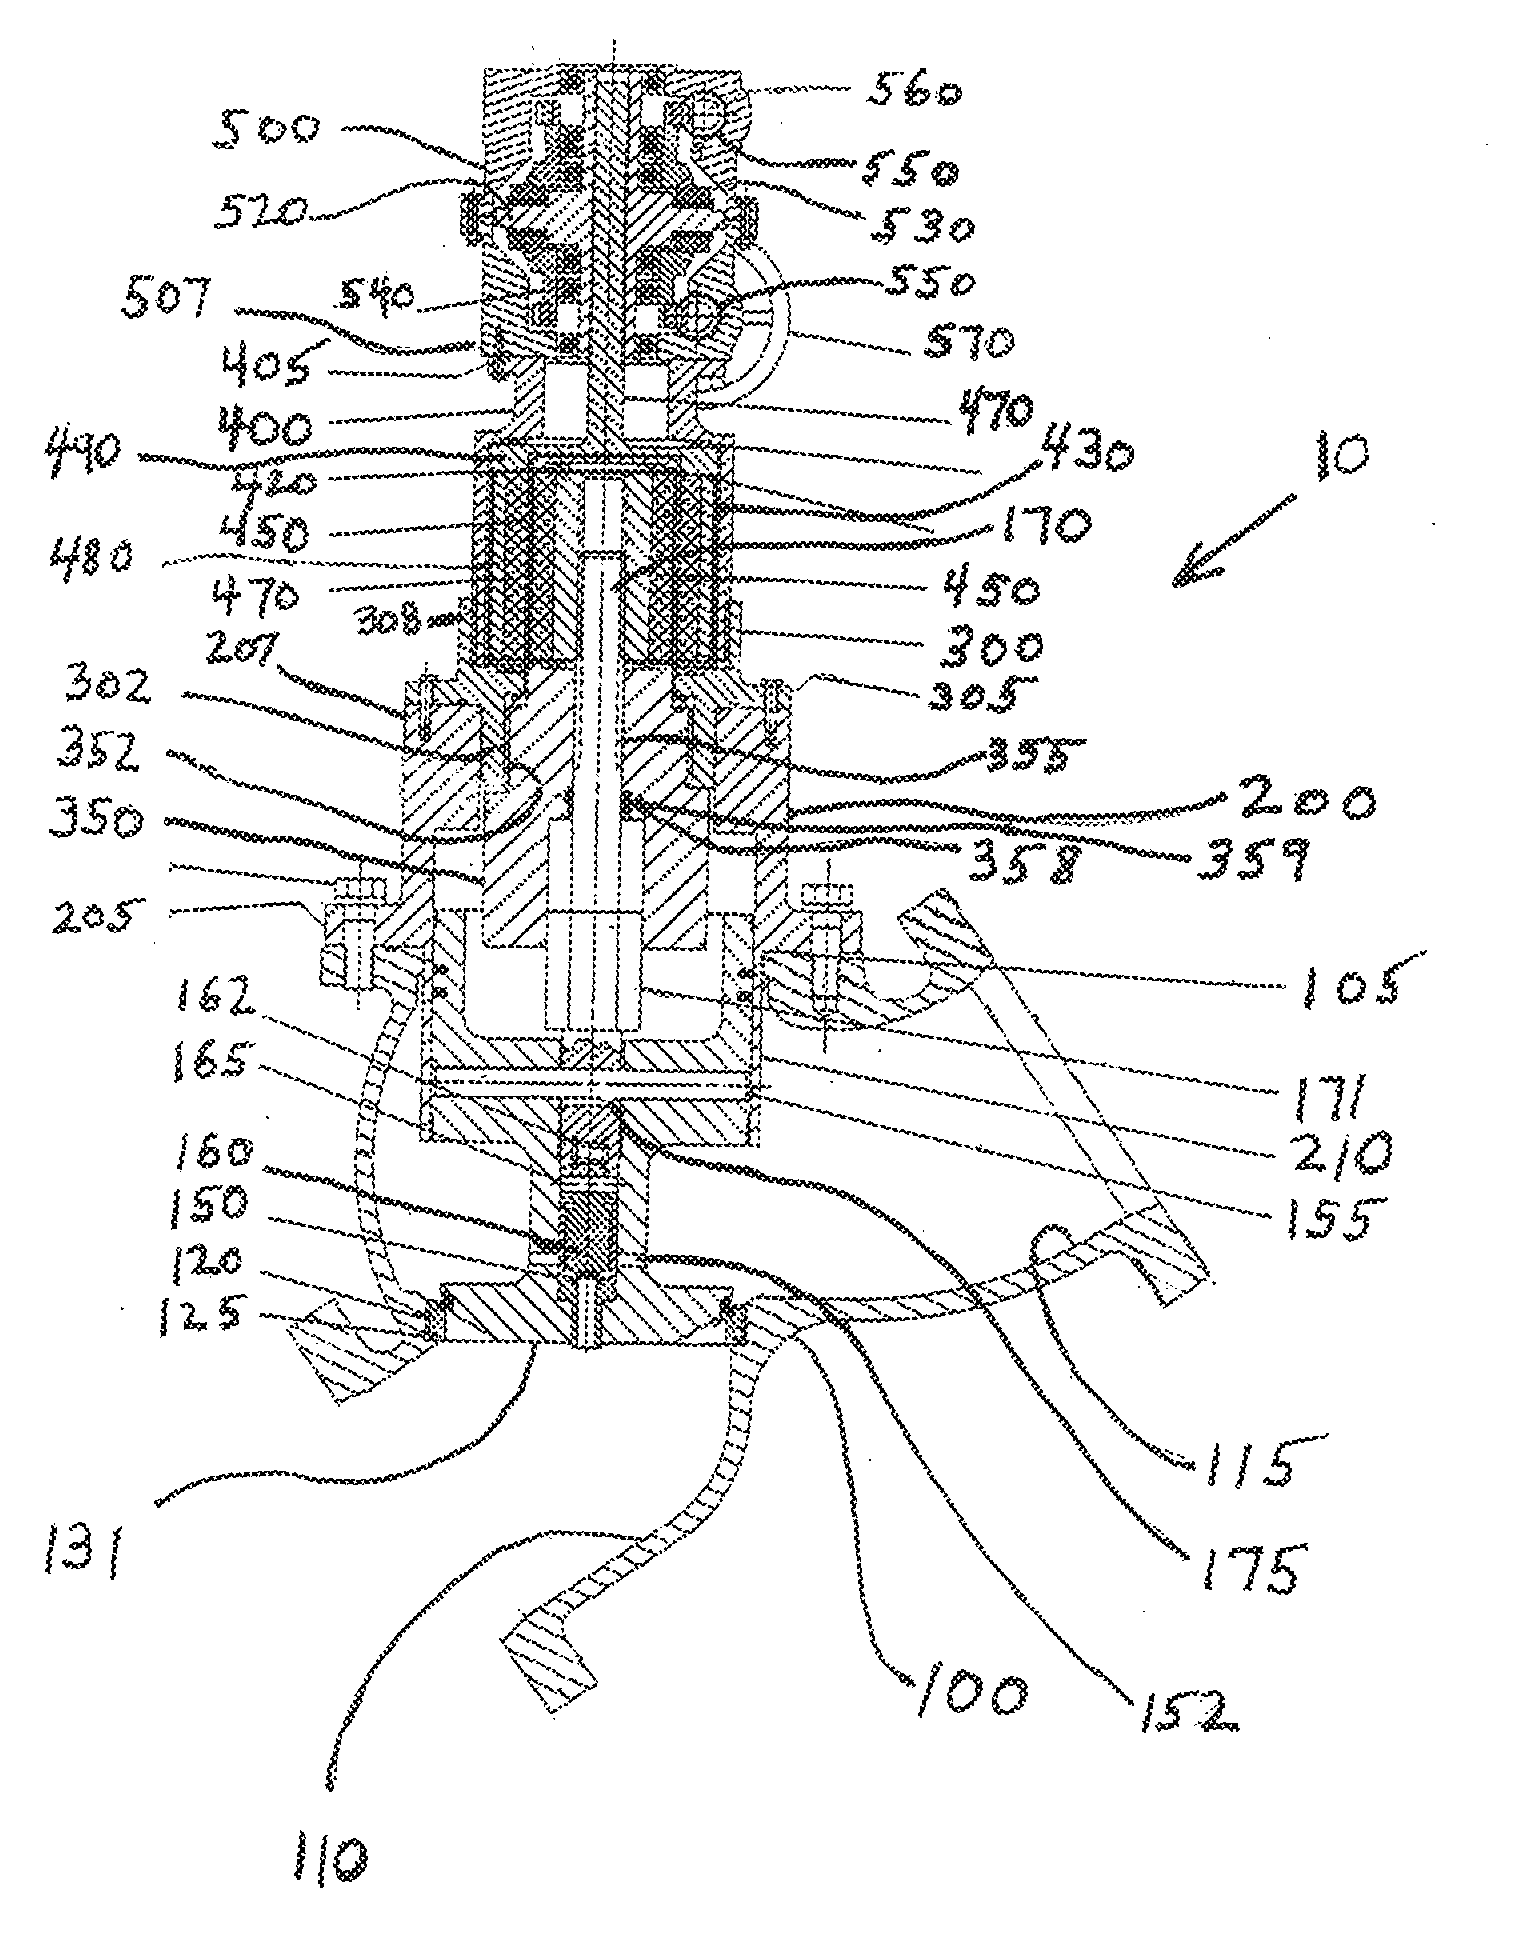 Valve assembly with magnetically coupled actuator